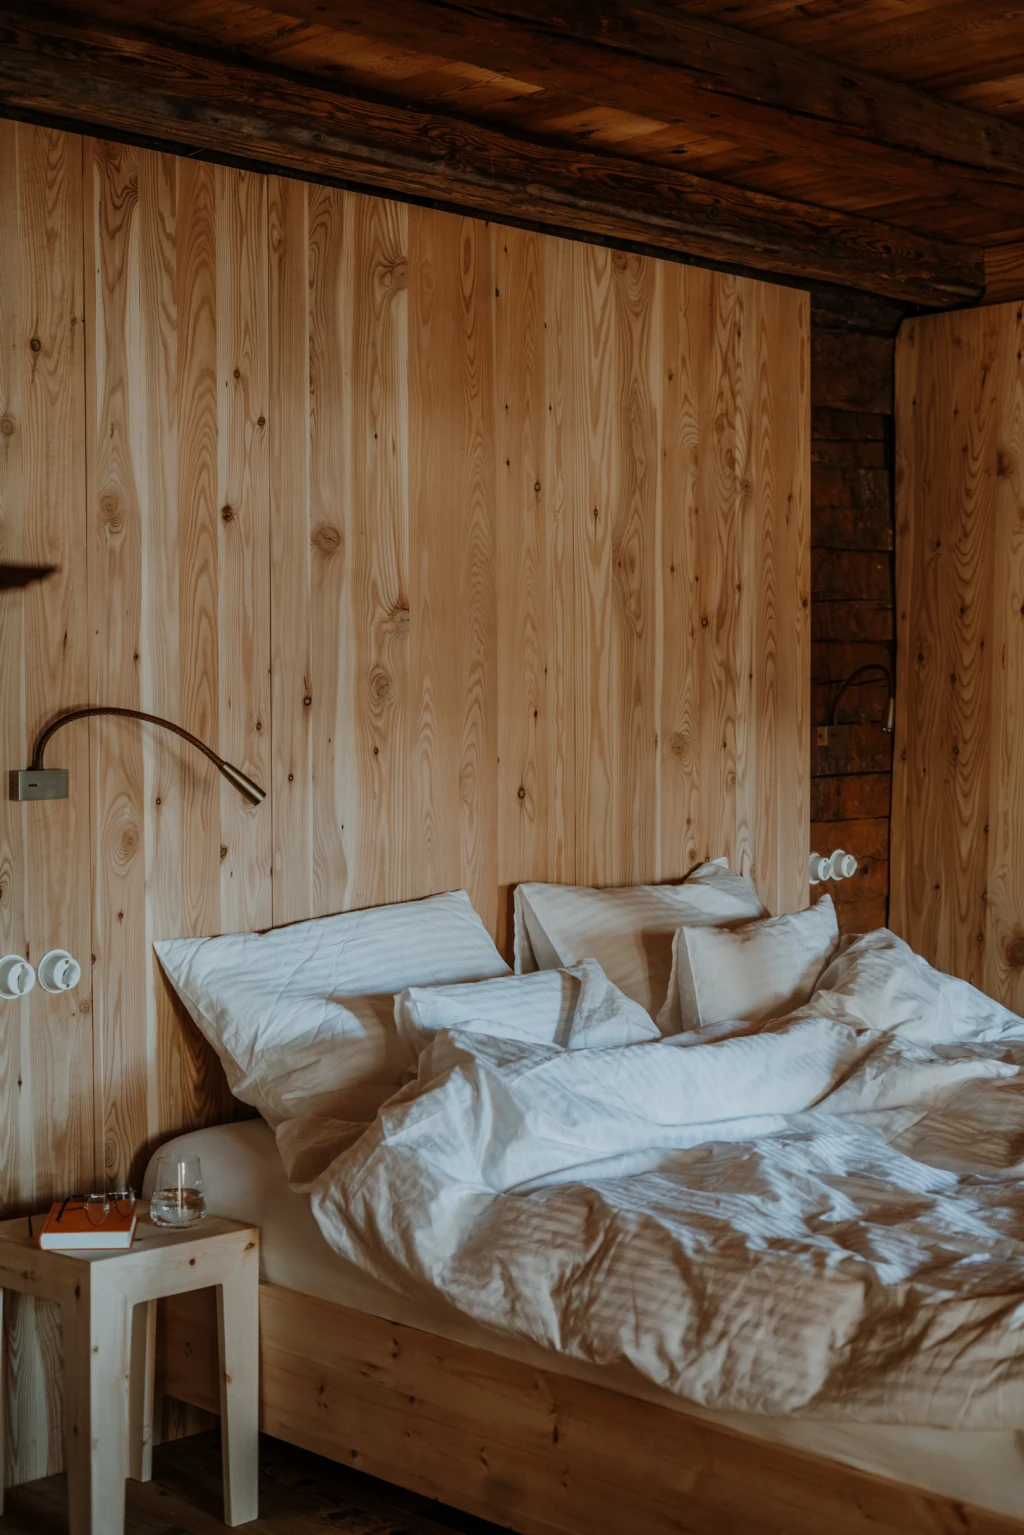 Each room has its own unmistakable character and is furnished with a large double bed made of Swiss pine, this in combination with the absolute quietude of the remote Dosoledo village are the major ingredients for a restful night's sleep